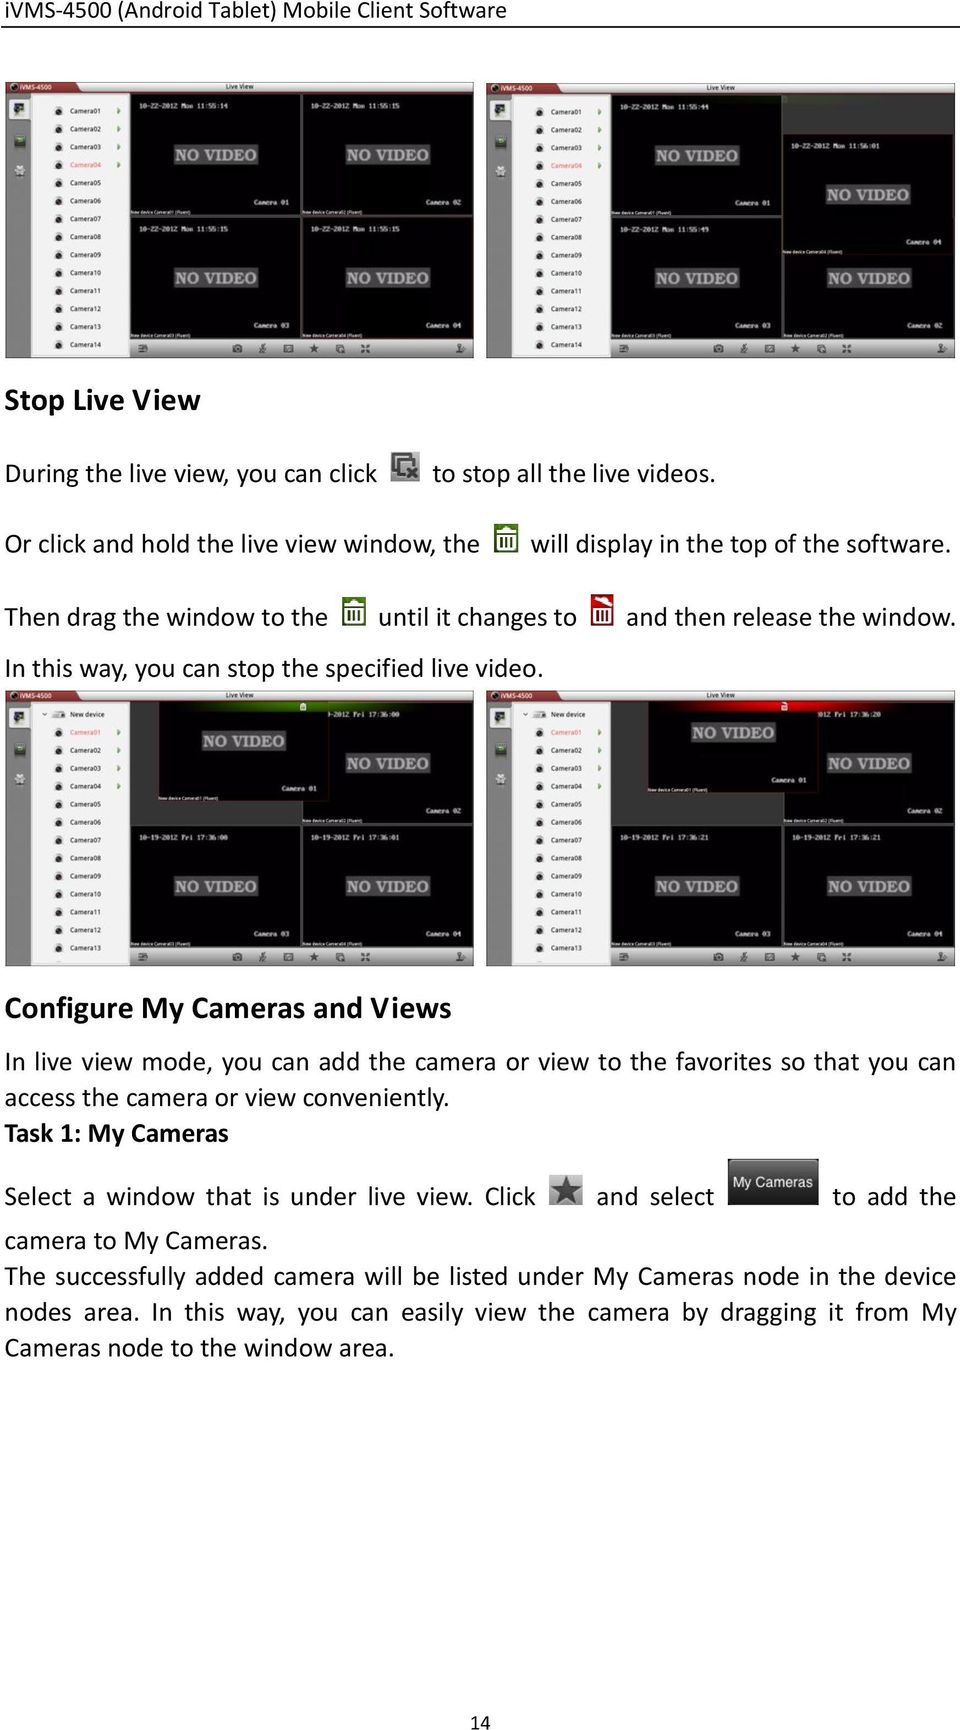 Configure My Cameras and Views In live view mode, you can add the camera or view to the favorites so that you can access the camera or view conveniently.